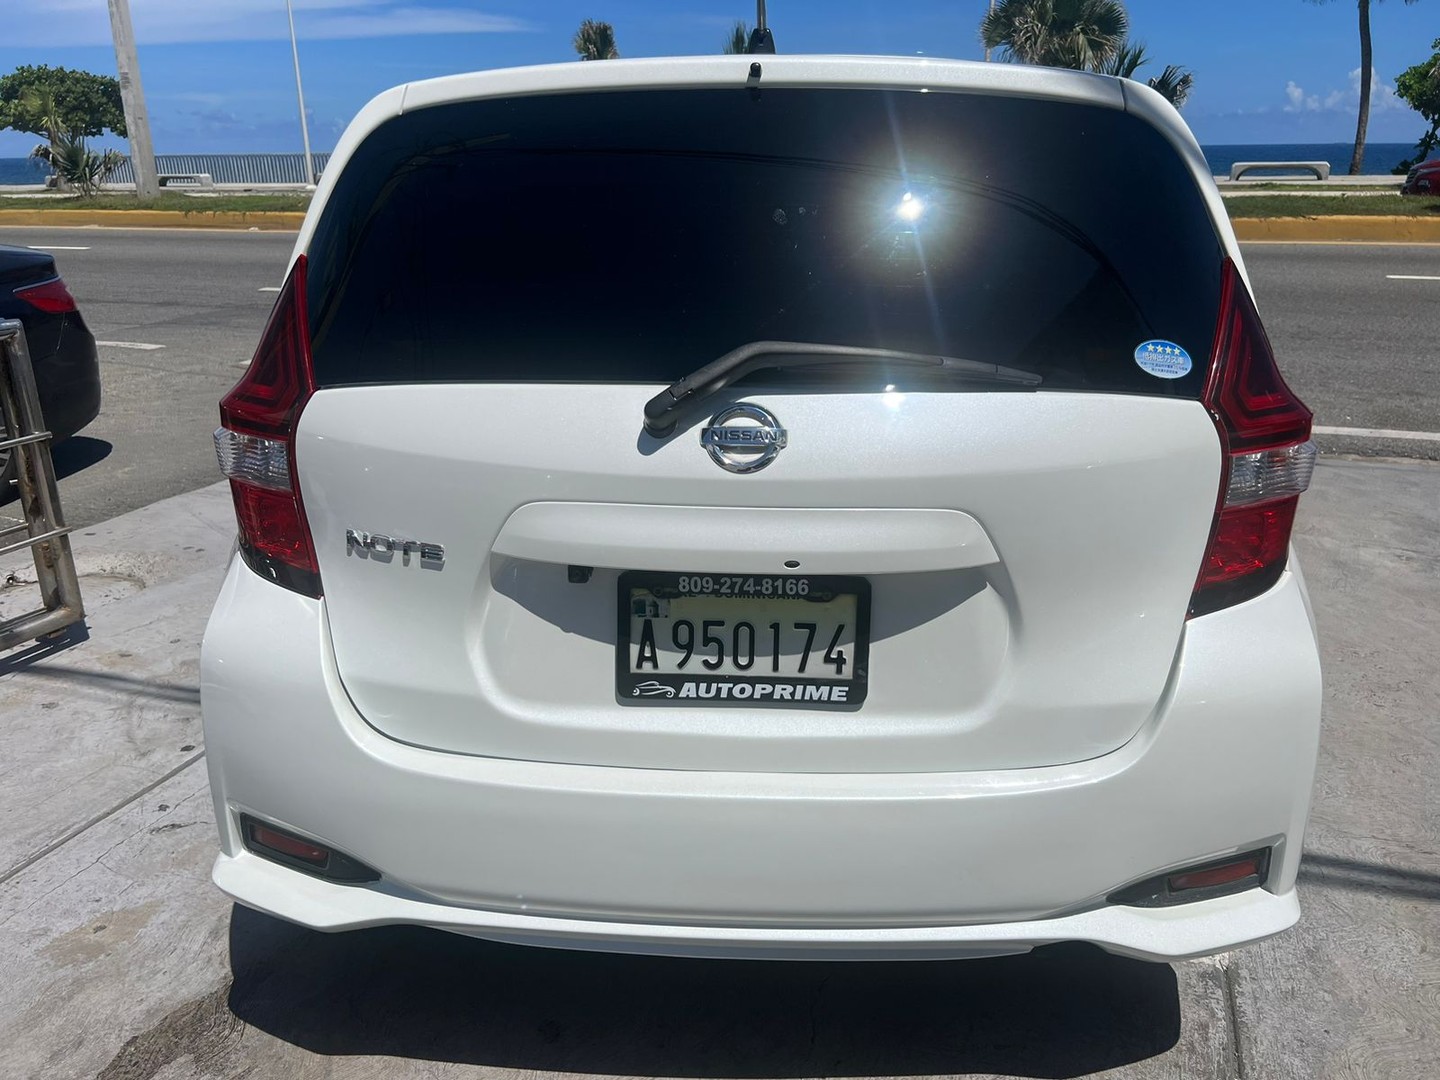 carros - Nissan Note 2018 8